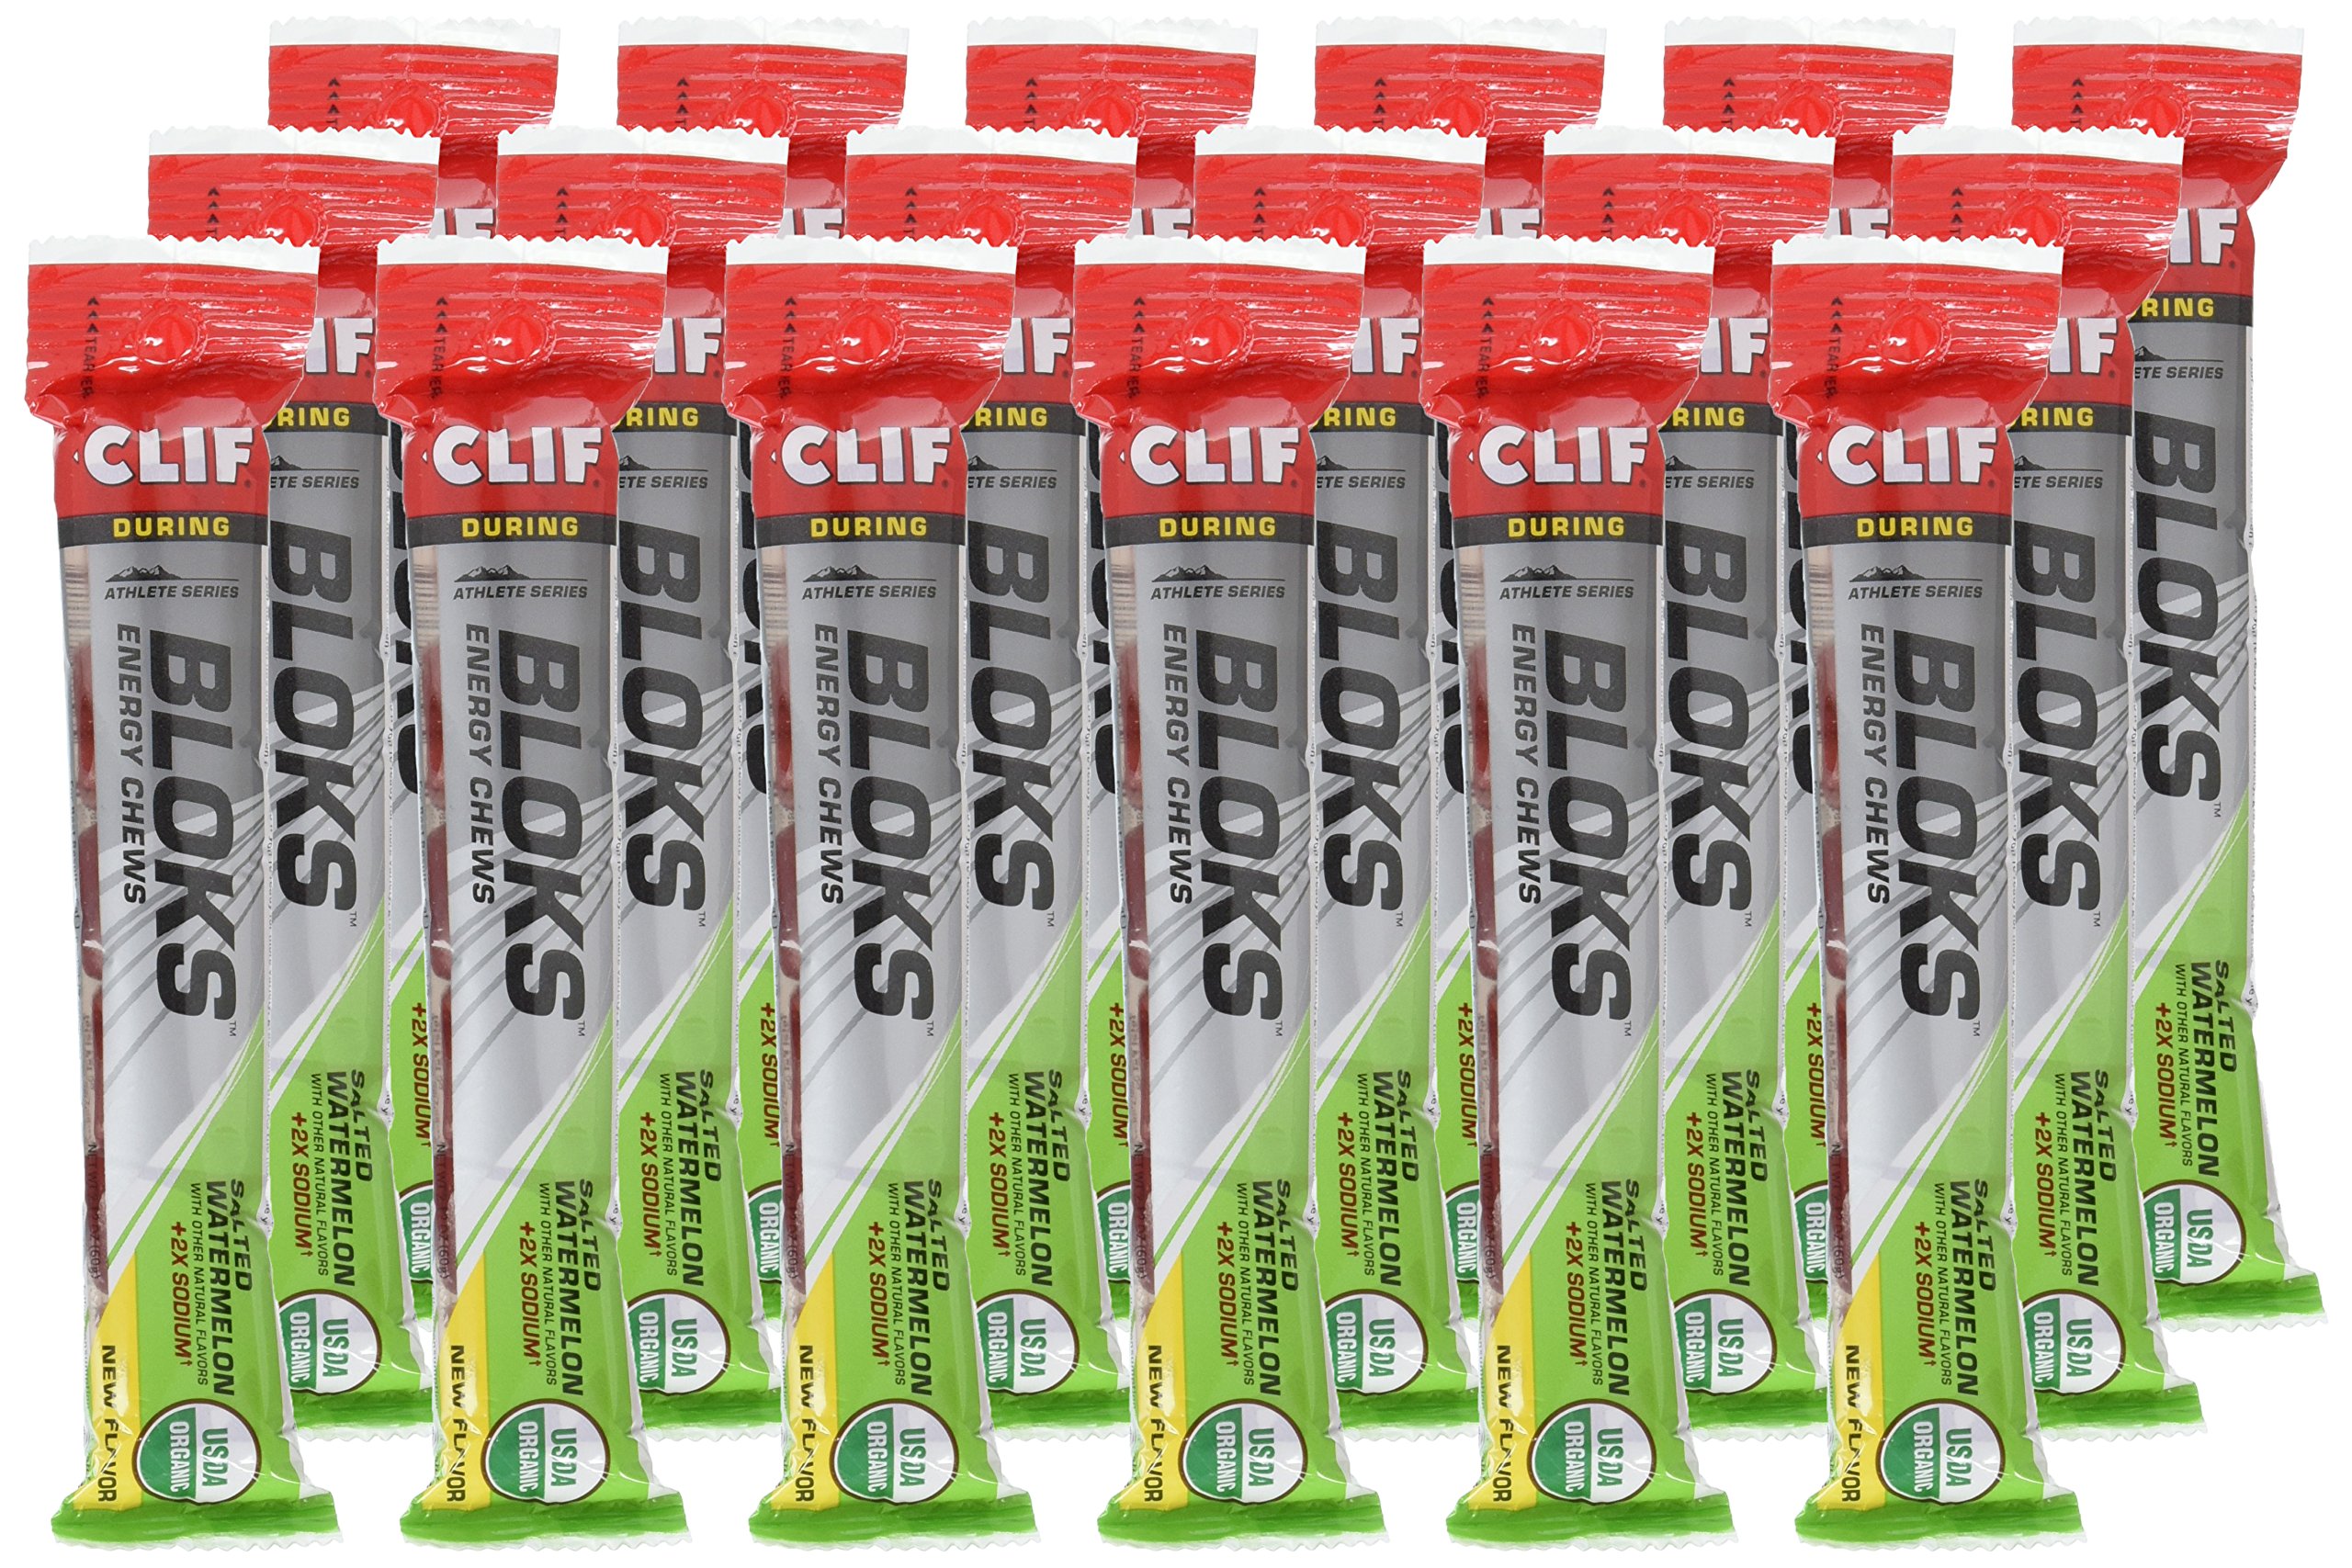 Clif Bloks - Energy Chews - Salted Watermelon -Non-GMO - Plant Based Food - Fast Fuel for Cycling and Running -Workout Snack (2.1 Ounce Packet, 18 Count) - (Assortment May Vary)